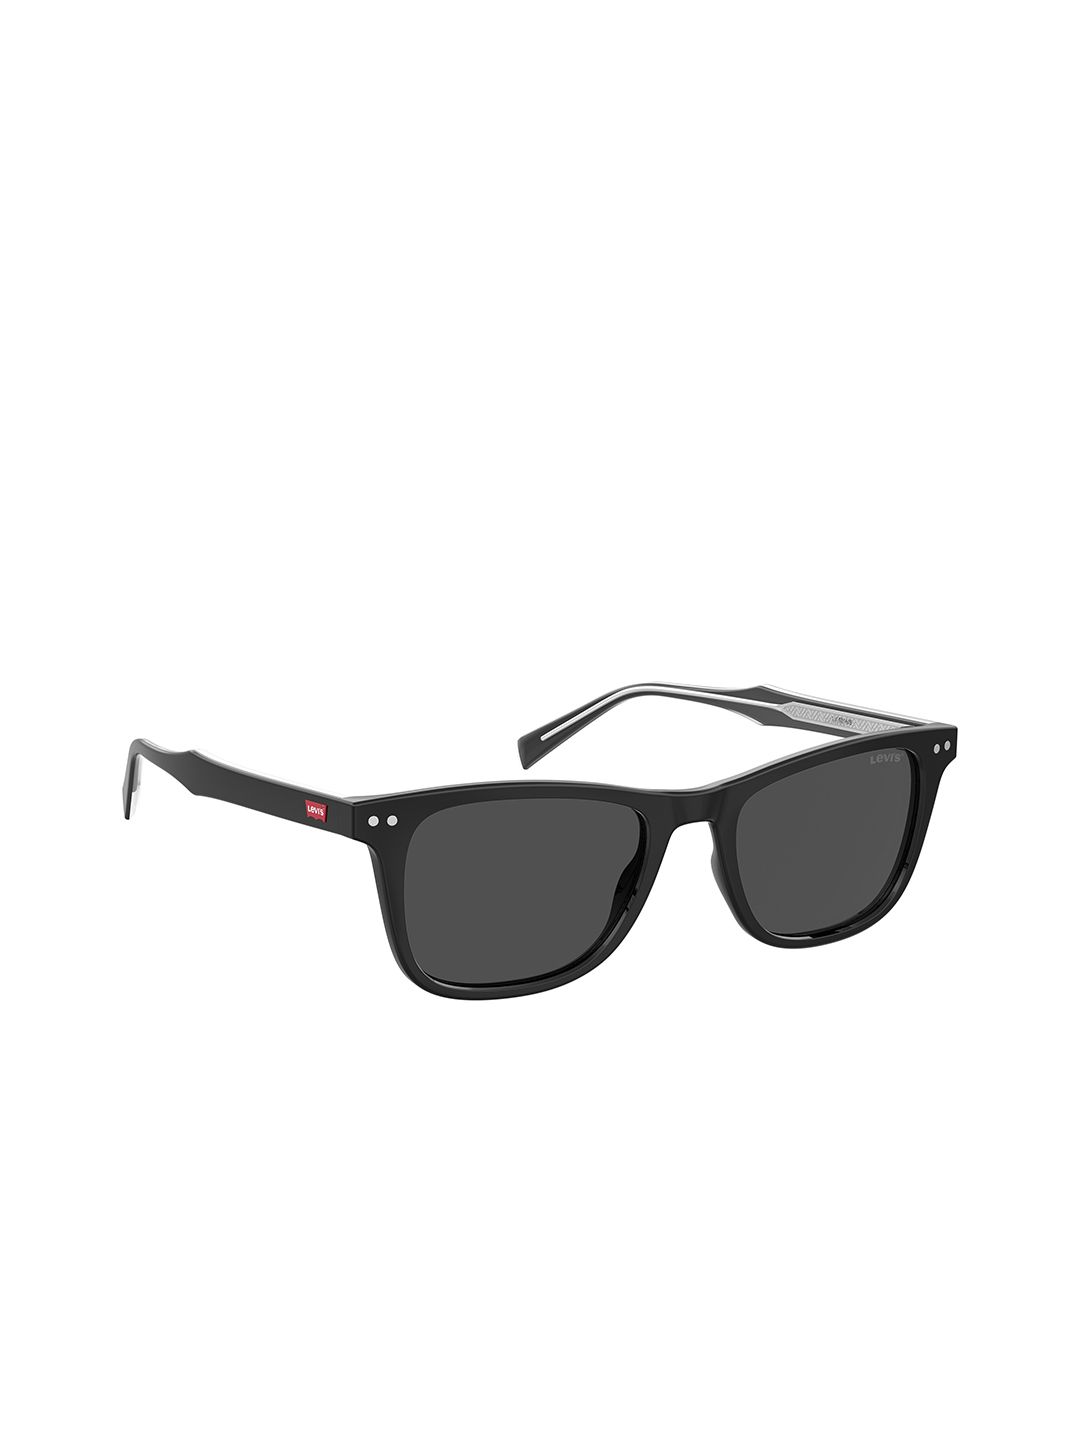 Levis Grey Lens & Black Aviator Sunglasses with UV Protected Lens LV 5016/S 807 52IR Price in India